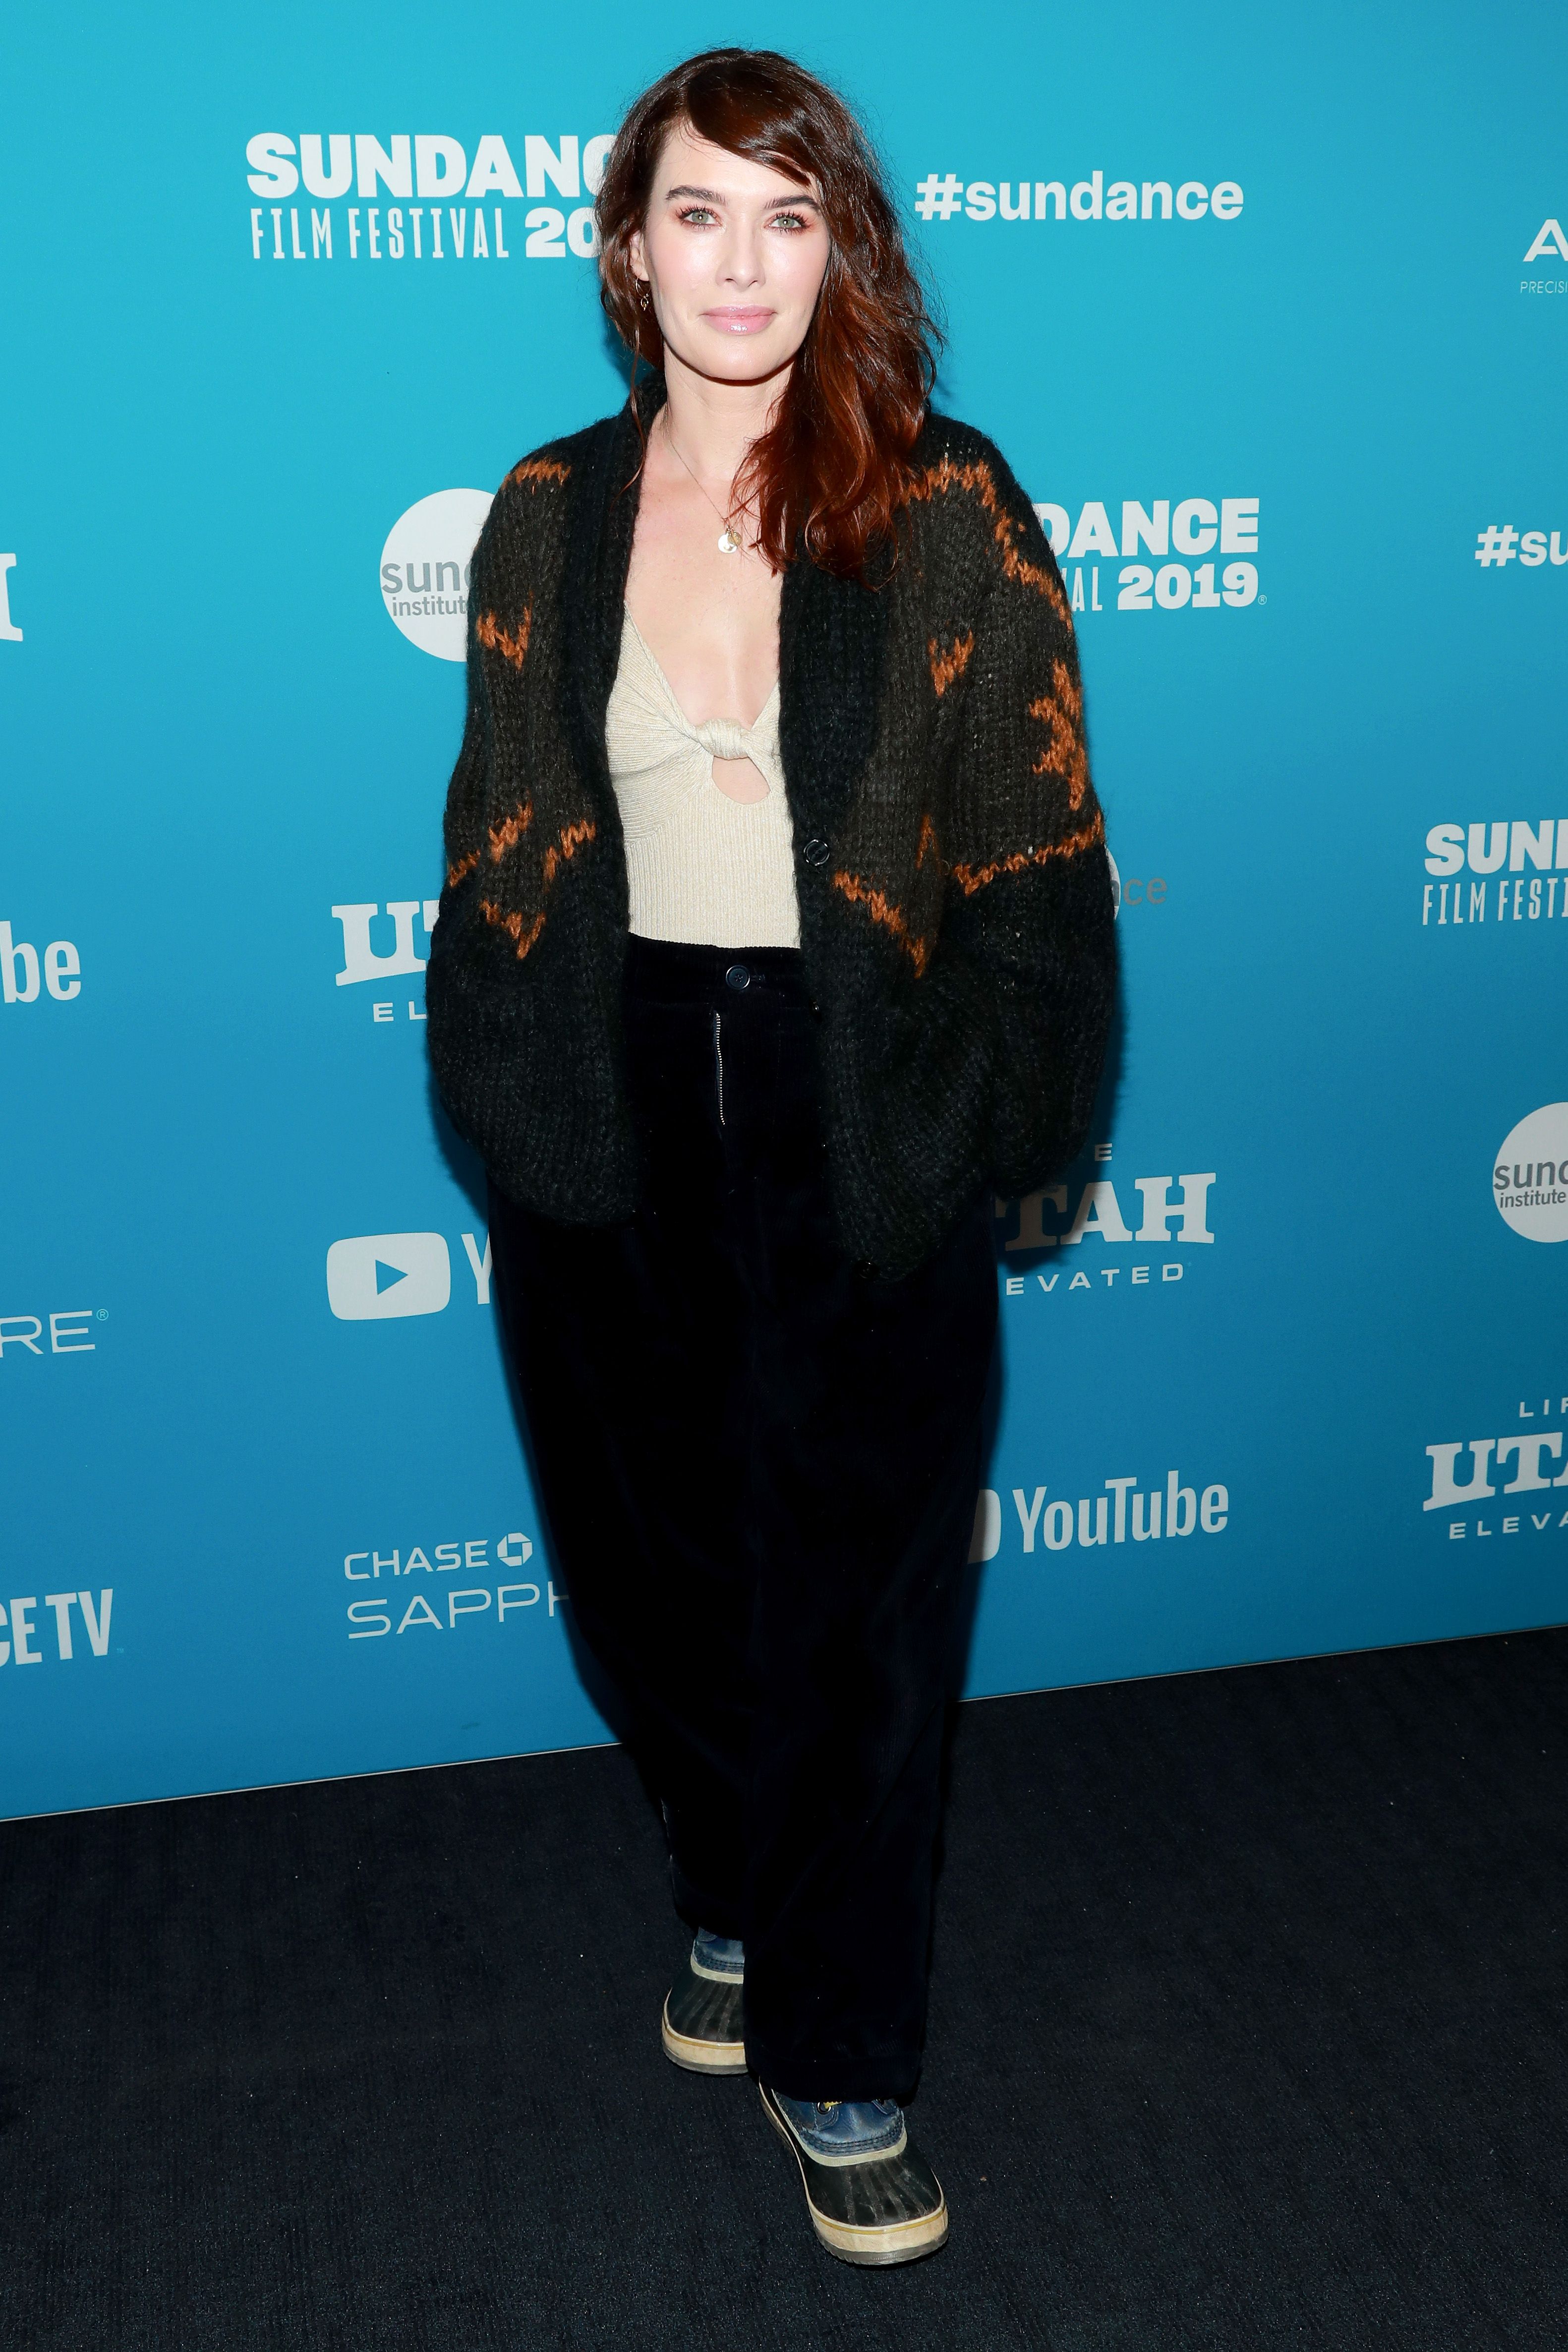 Lena Headey during the 2019 Sundance Film Festival at The Ray on January 28, 2019, in Park City, Utah. | Source: Getty Images